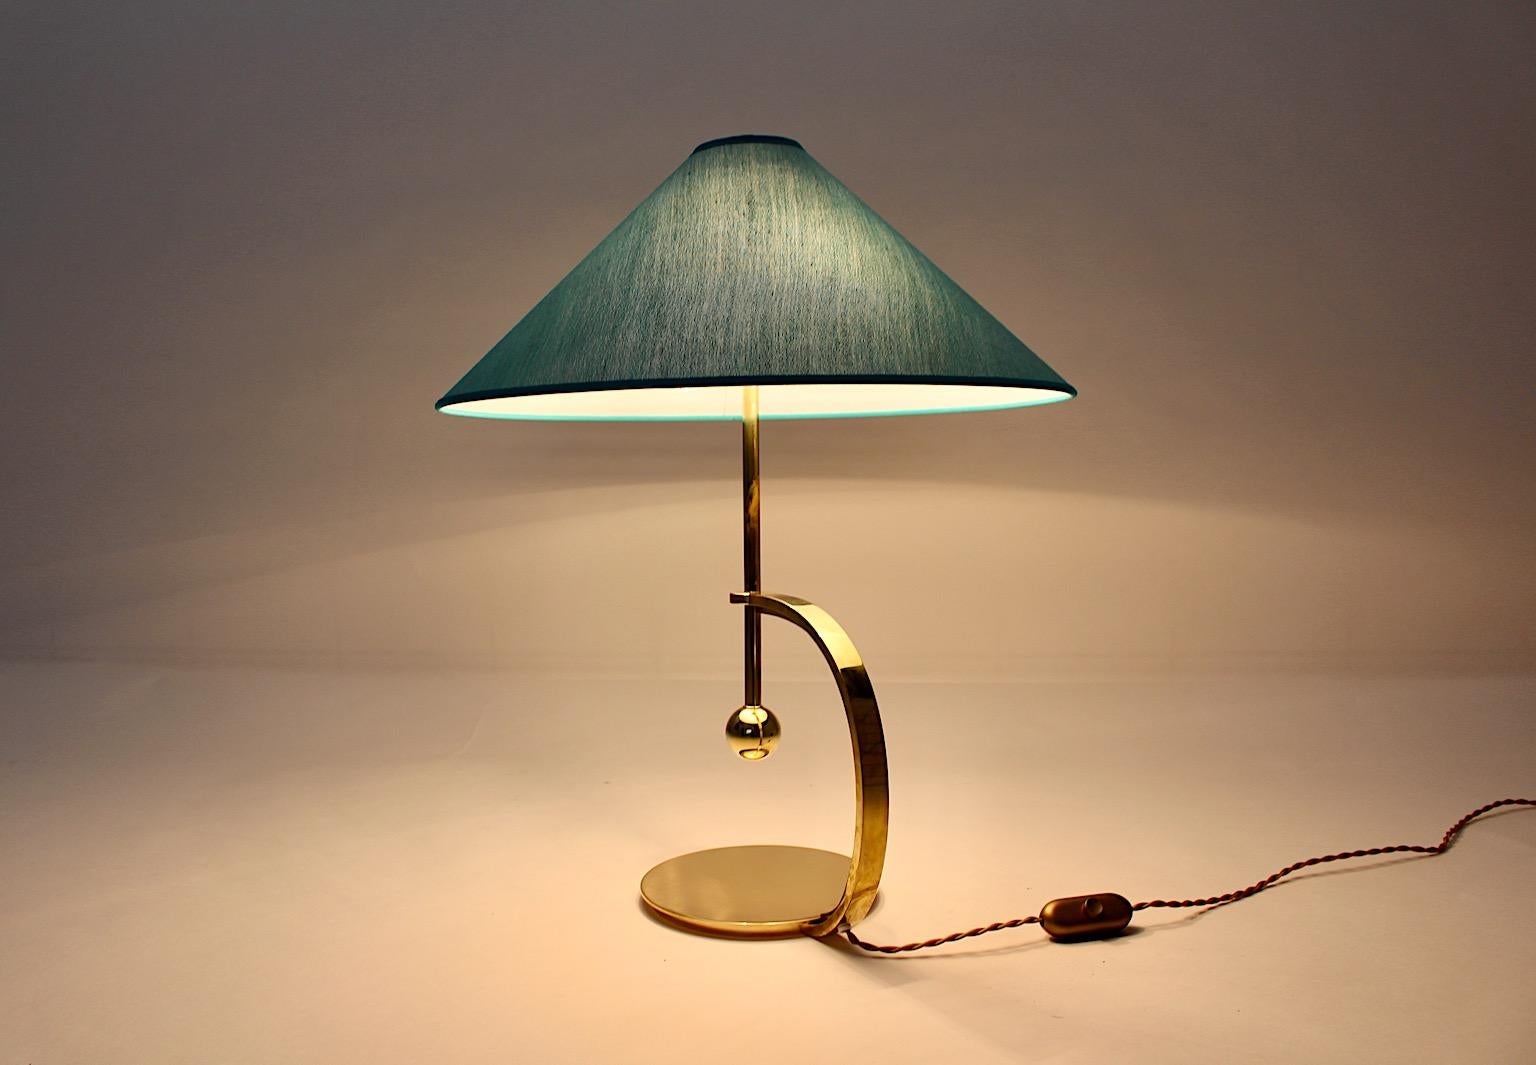 Early 20th Century Art Deco Brass Vintage Table Lamp Blue Teal Textile Shade Vienna C 1925 For Sale